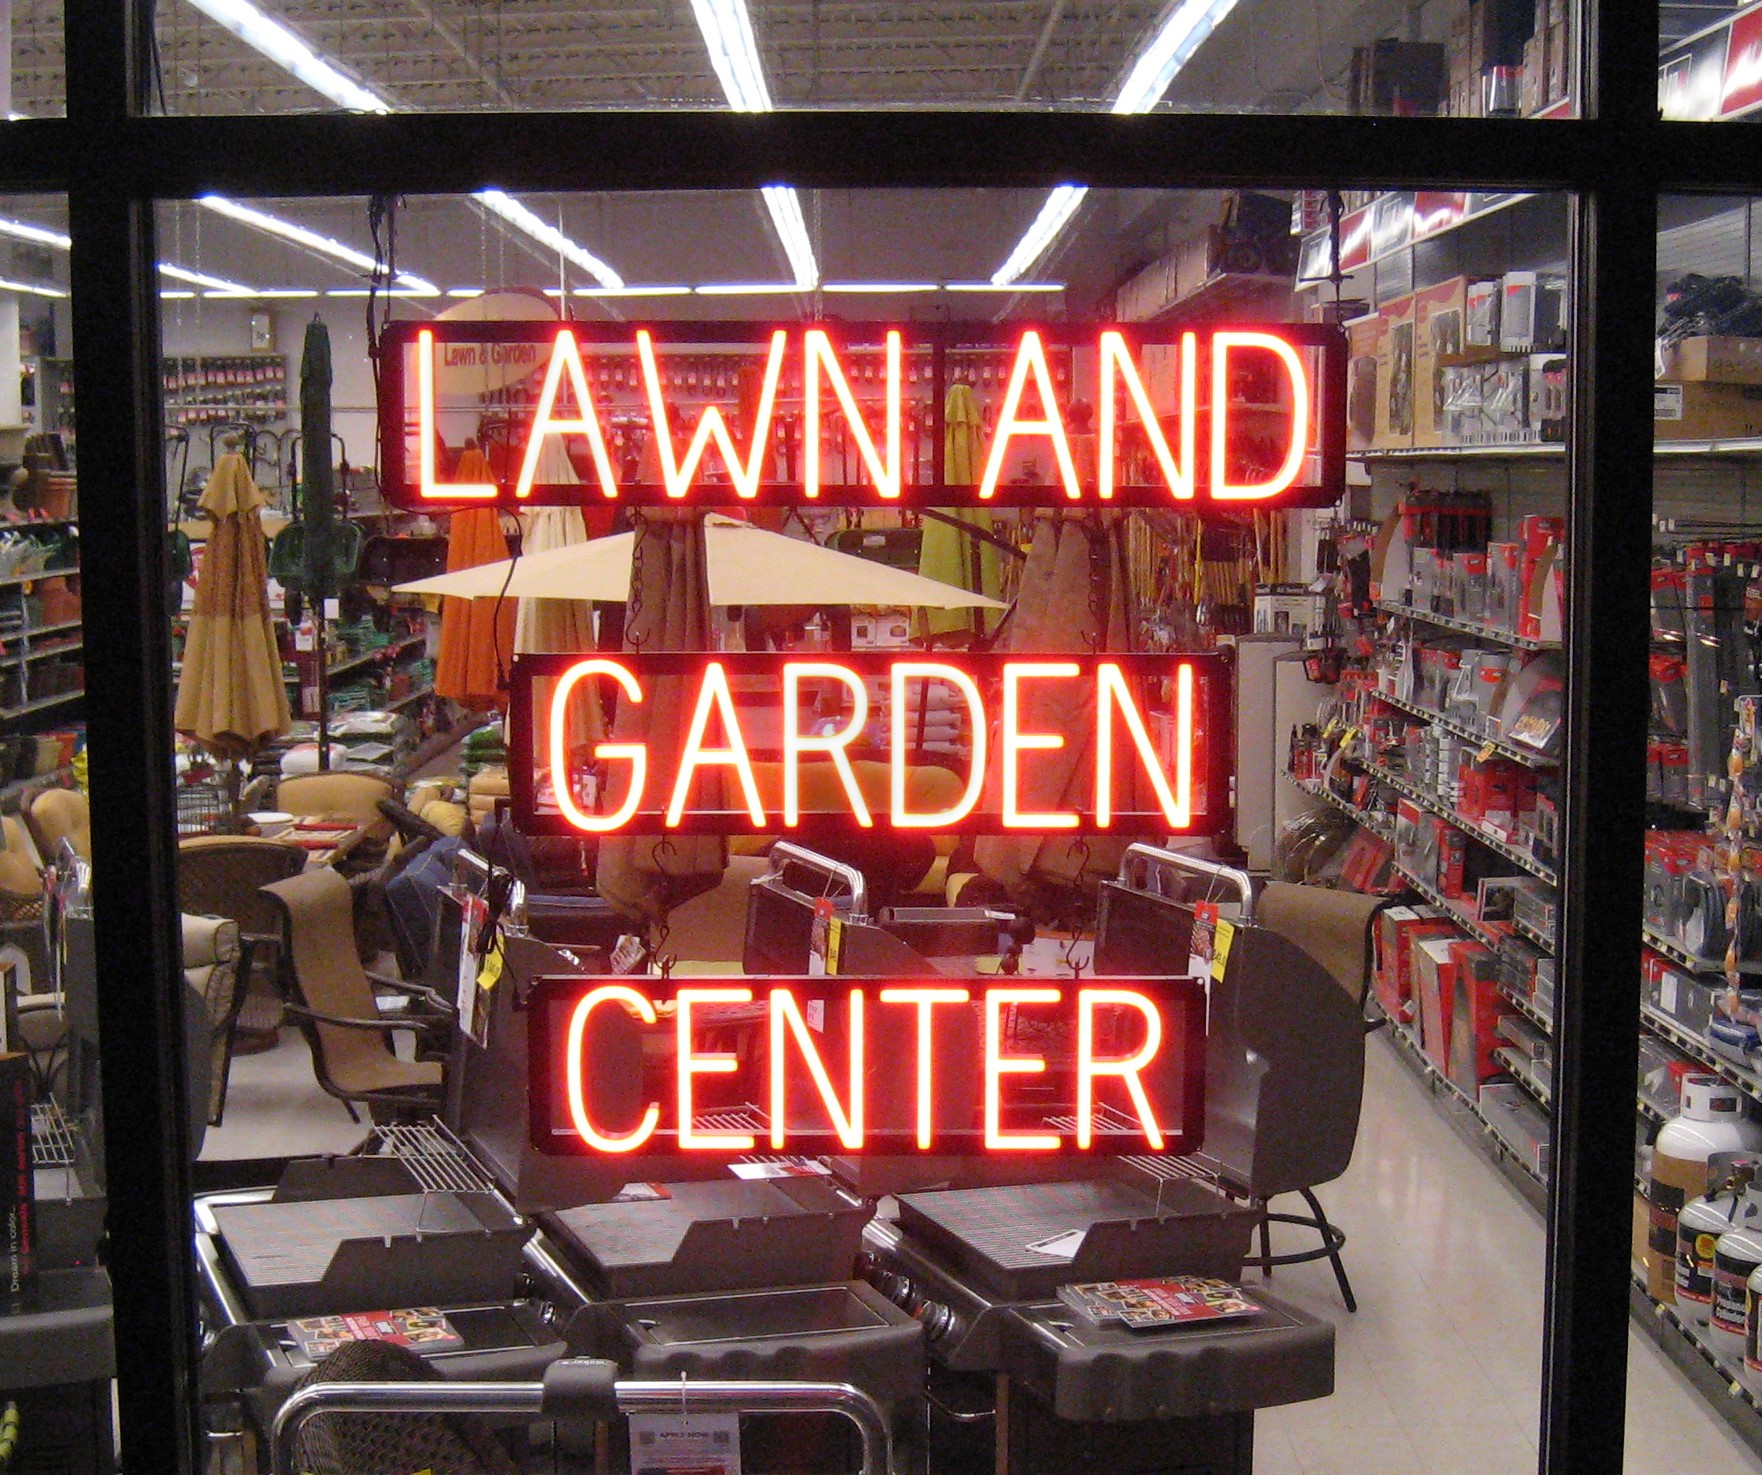 One of SpellBrite’s custom neon LED signs that lets passersby know they’ve found the “Lawn and Garden Center.”